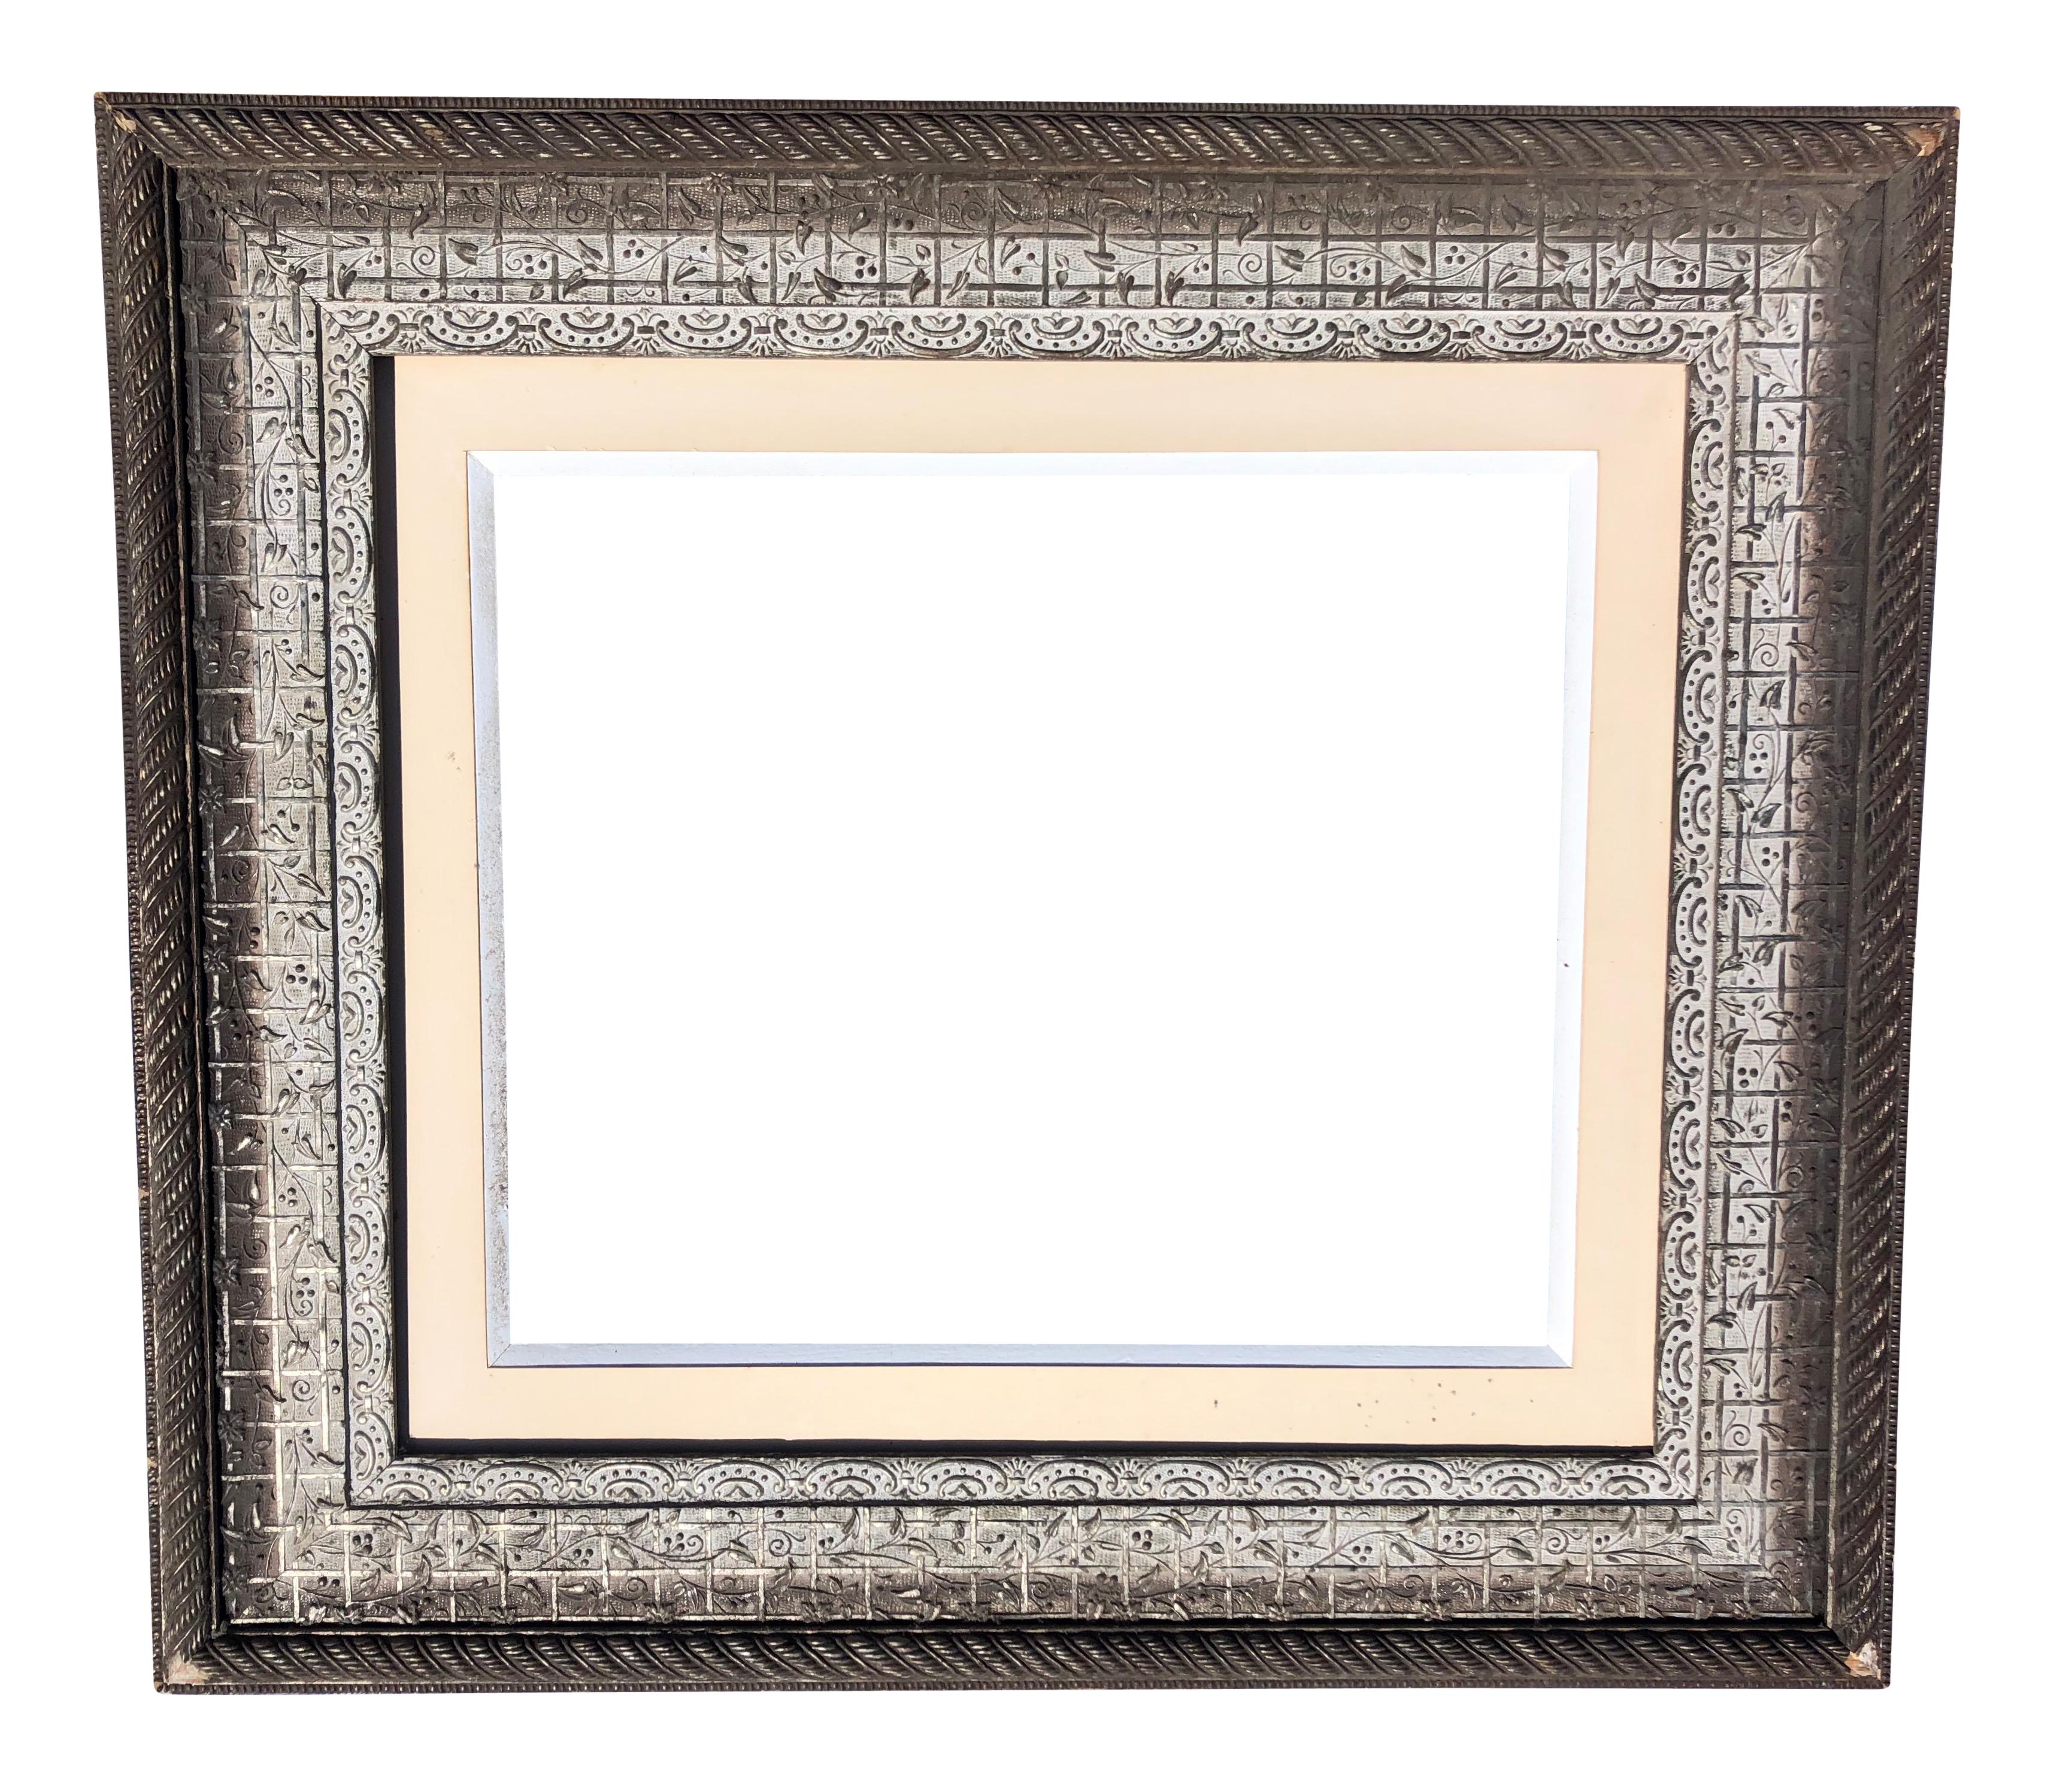 These are a set of 3 large wooden frames with silver, gold and natural wood colors. The sizes are listed below.

Sizes:
Wood H36.25 W32.4 D1 Inside for glass or painting H21 W25
Gold H35.5 W 29.5 D2, inside H30 W24
Silver H38.1 W33.9 D1.9,